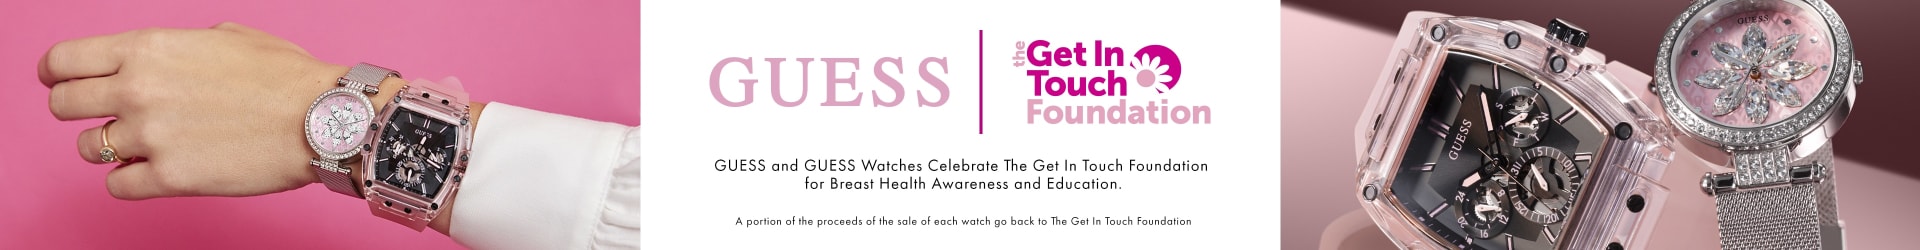  GUESS Watches celebrate The Get In Touch Foundation for Breast Health Awareness and Education